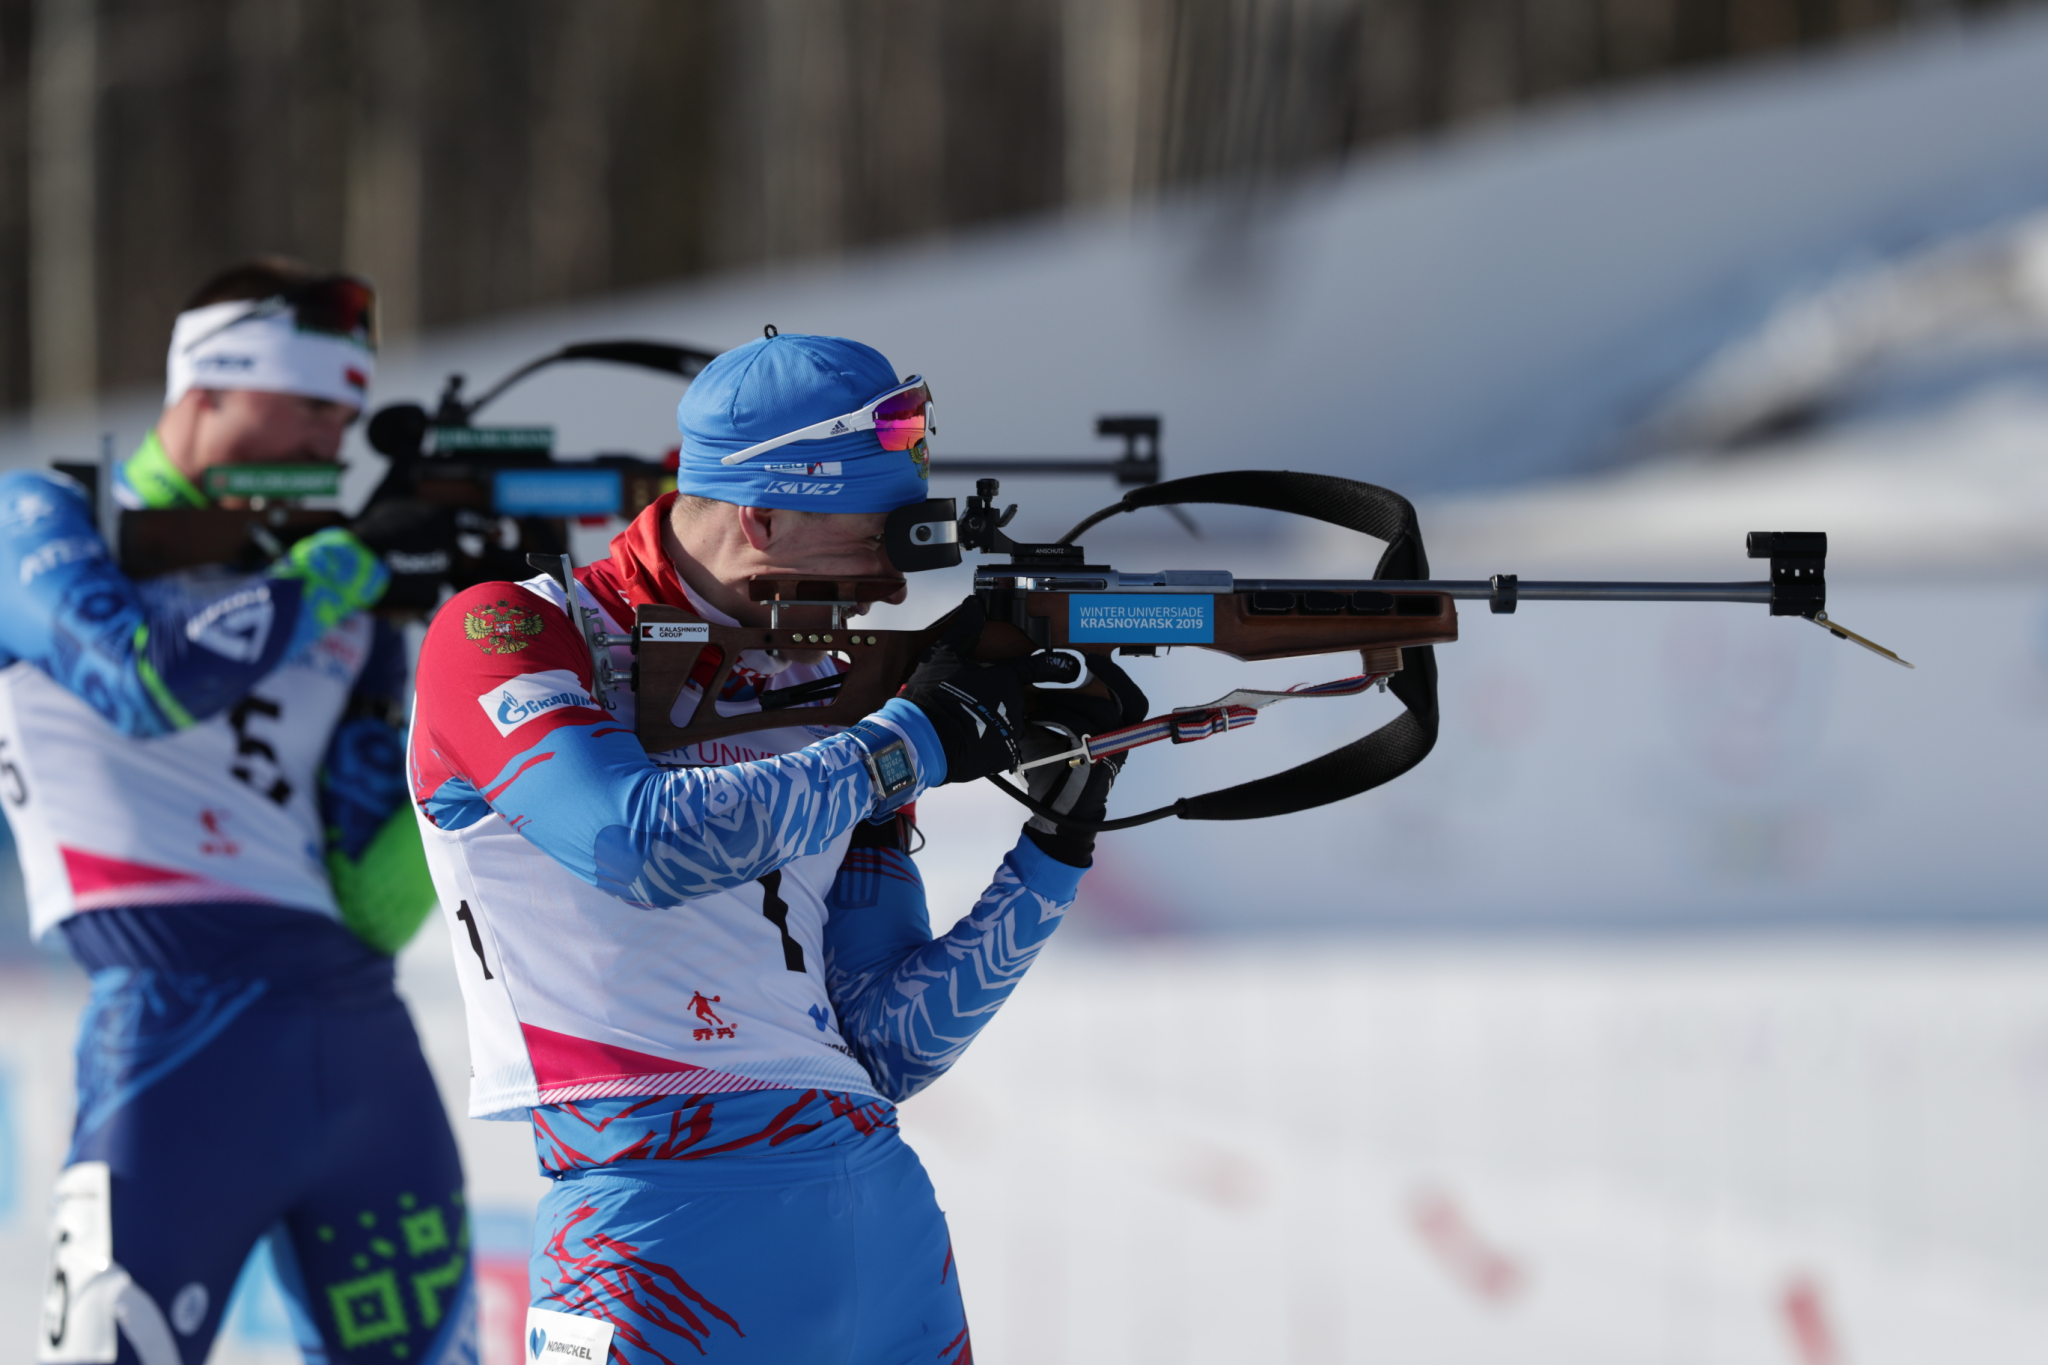 Viktor Maigurov has been re-elected as the President of the Russian Biathlon Union ©Getty Images